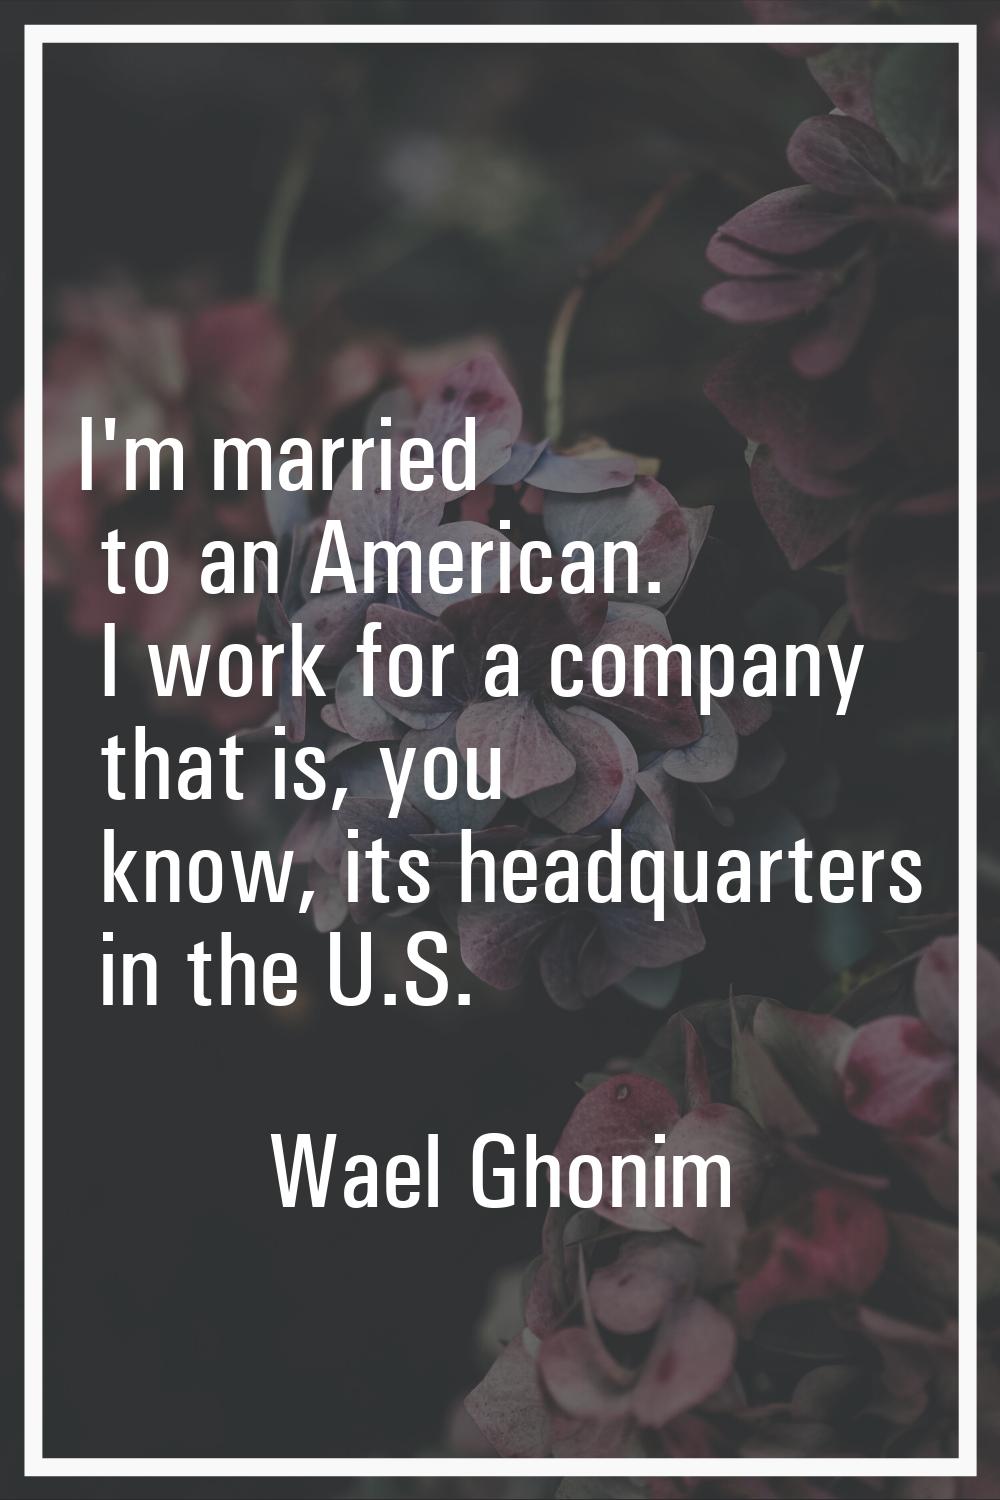 I'm married to an American. I work for a company that is, you know, its headquarters in the U.S.